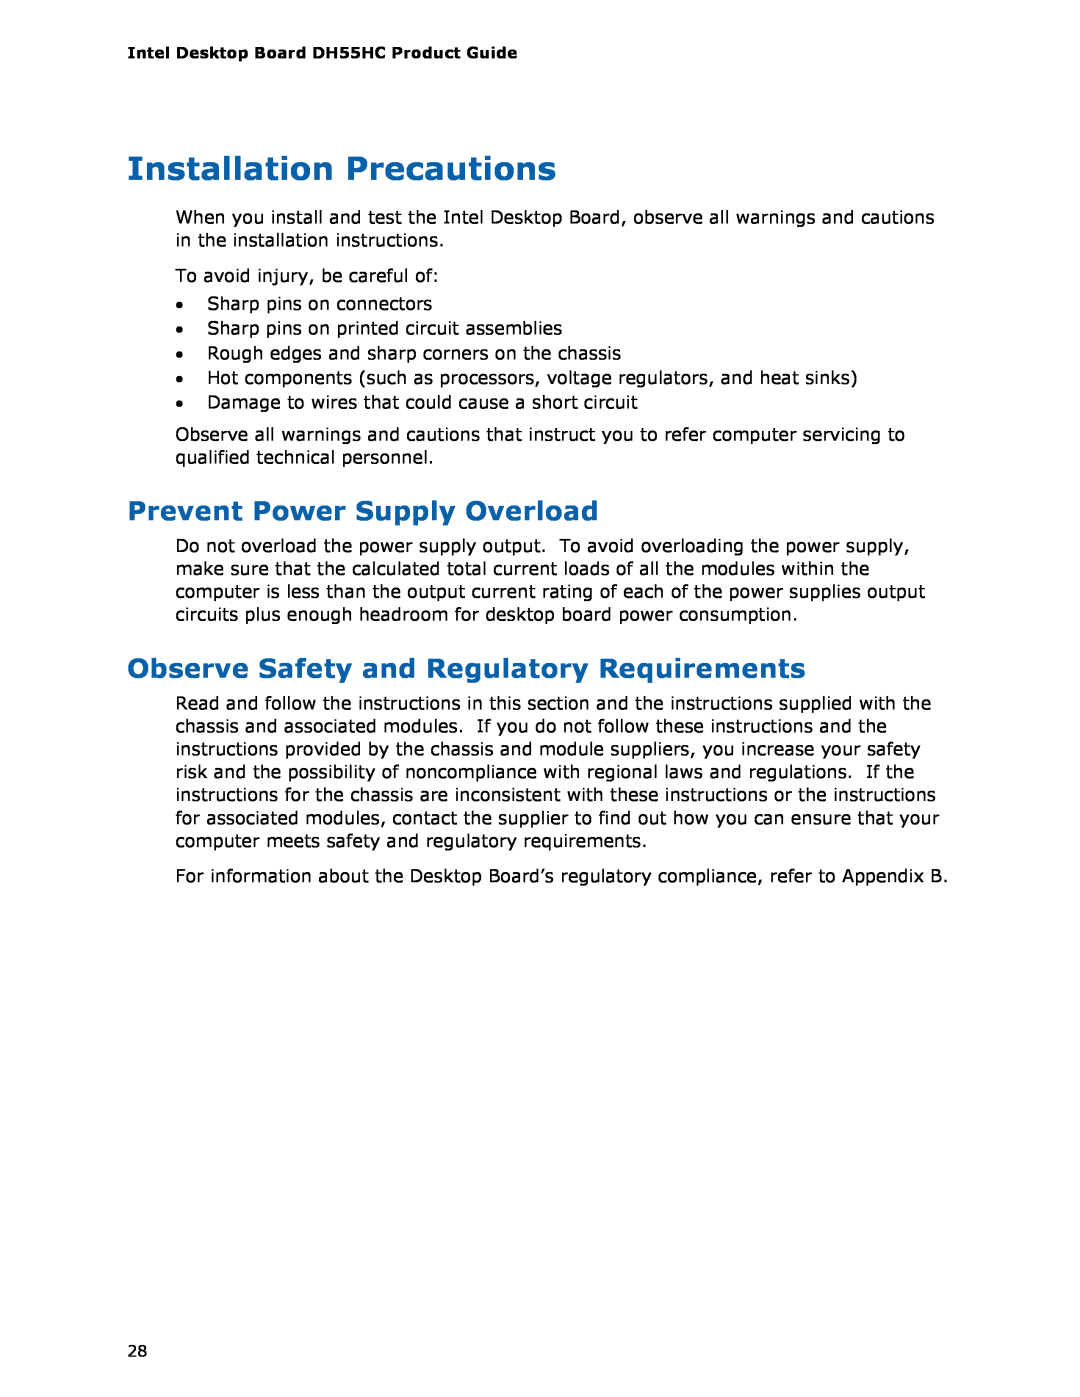 Intel BOXDH55HC manual Installation Precautions, Prevent Power Supply Overload, Observe Safety and Regulatory Requirements 